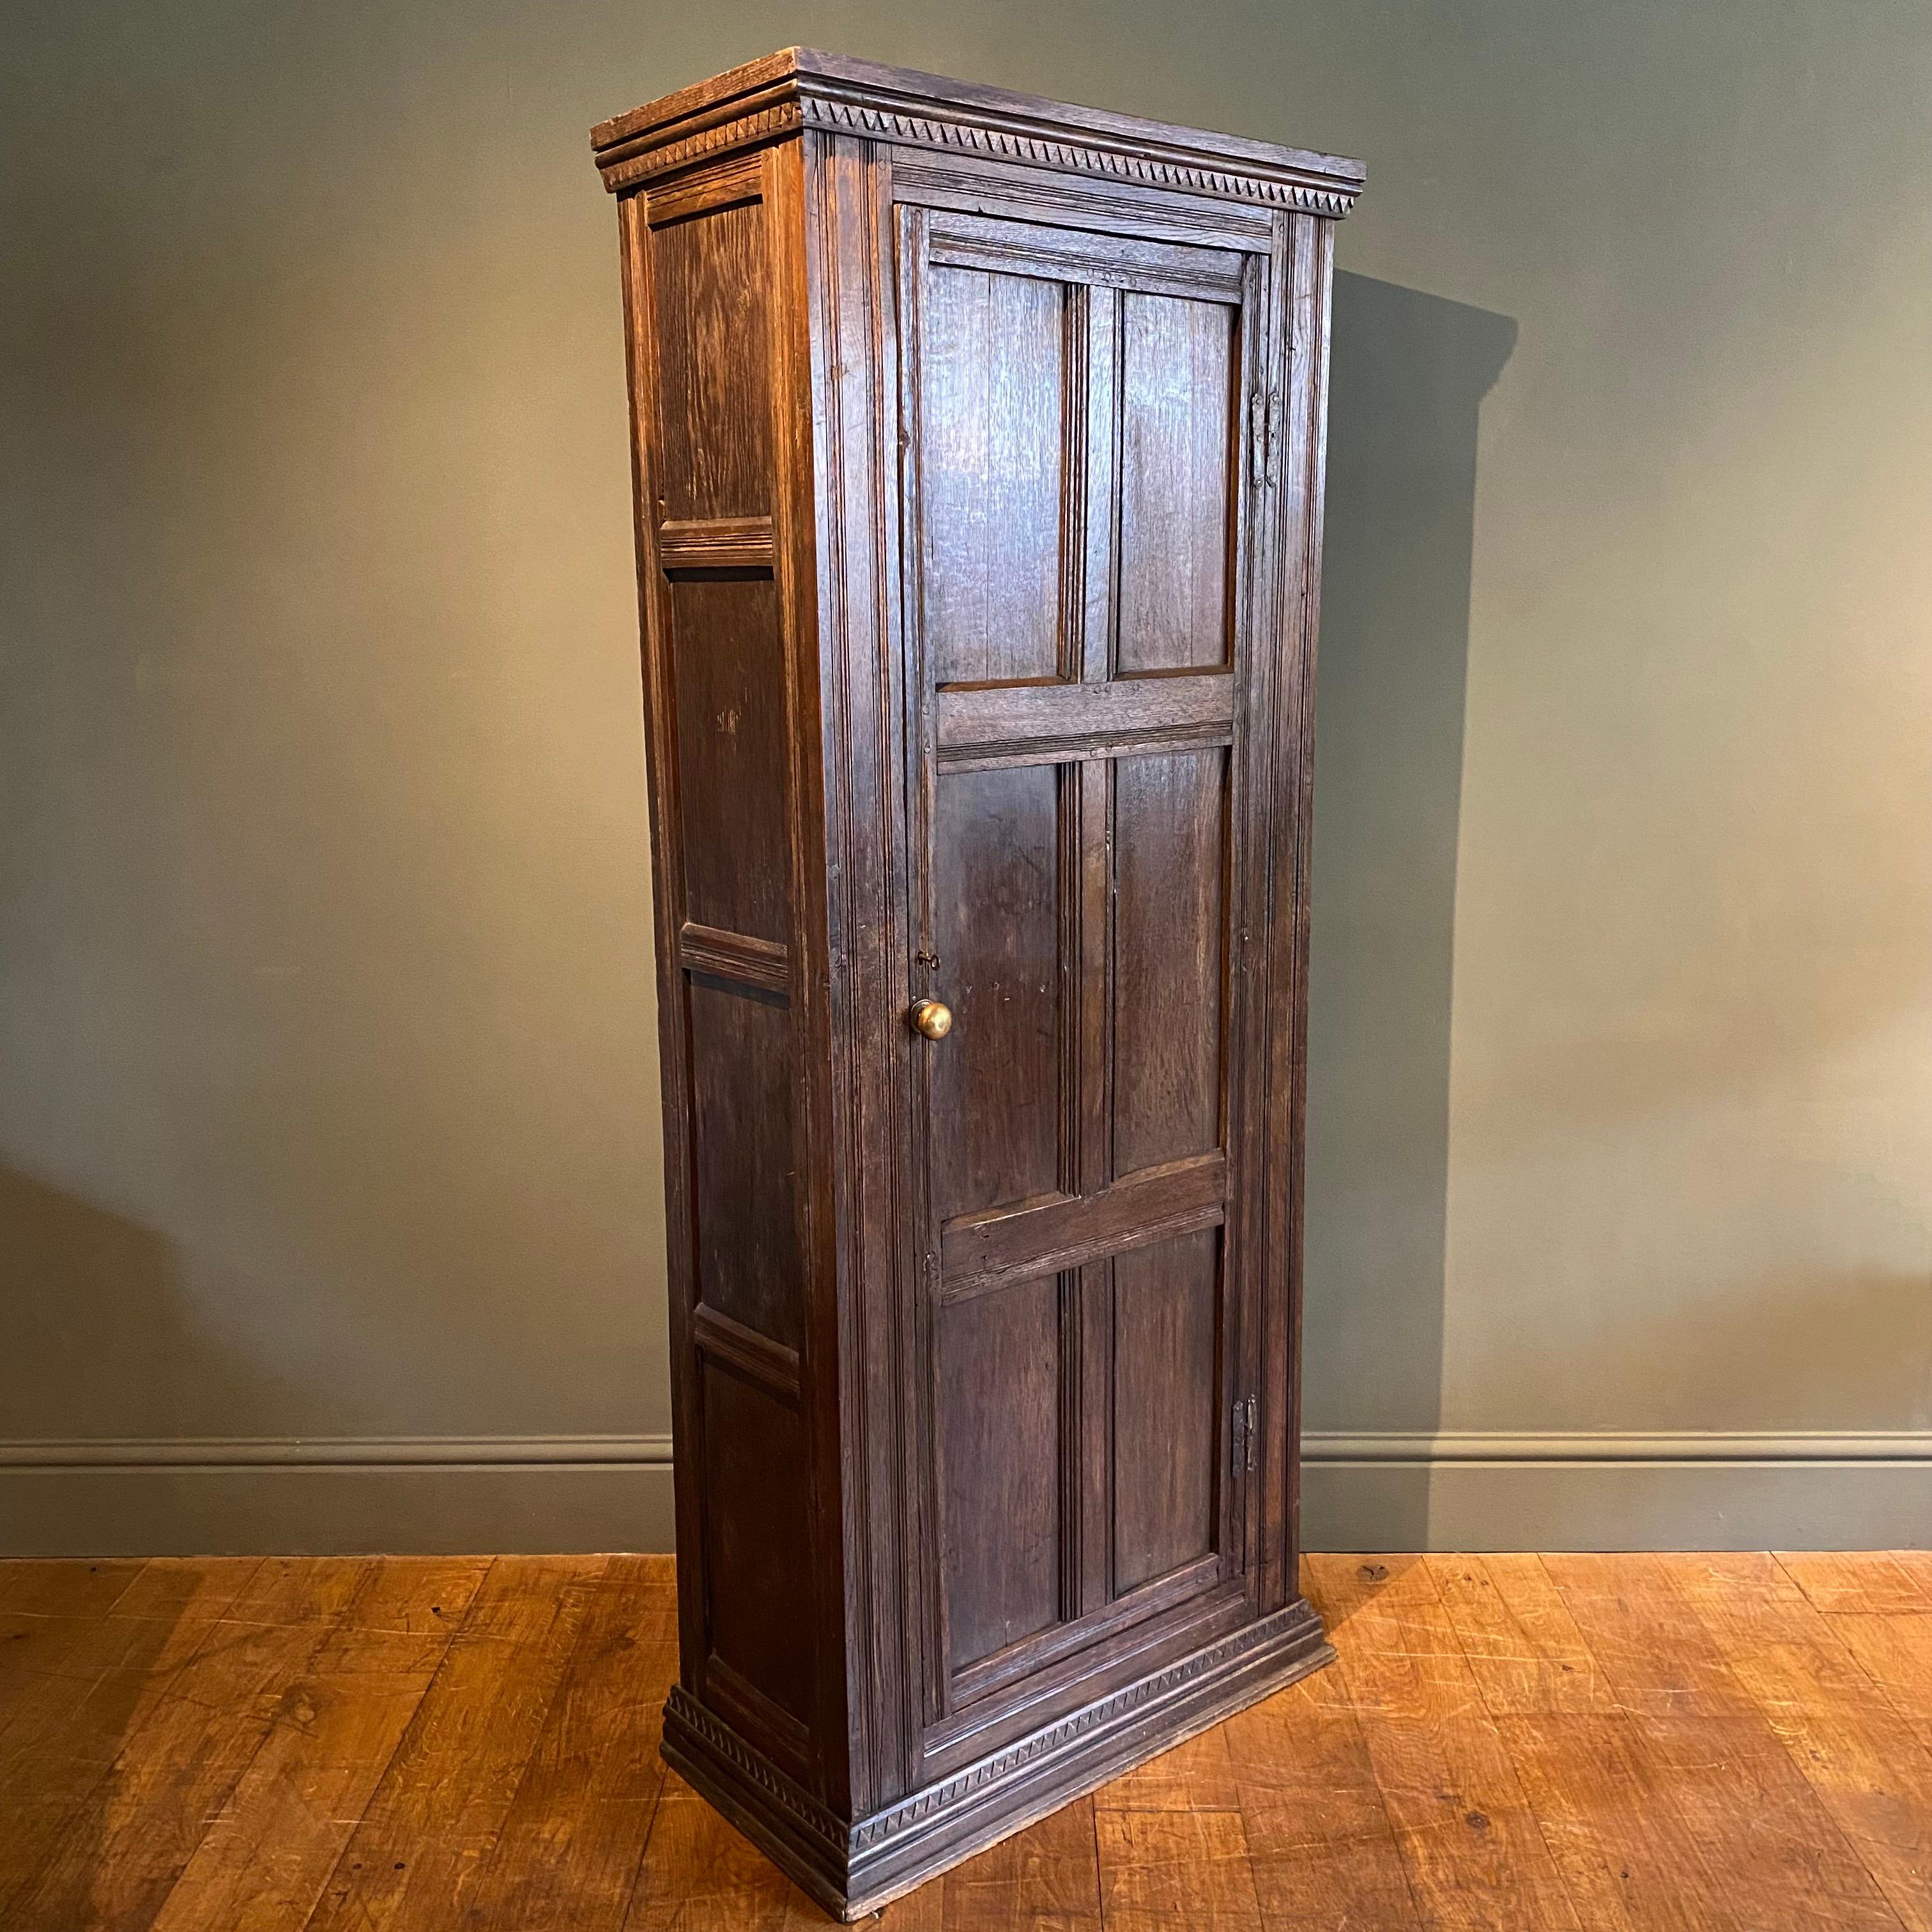 A very useful early English oak cupboard. The slender size means it would be perfect for a halfway or small flat. It was once used as a gun cabinet so still has internal bolts which could easily be removed. Quite possibly started off life as a